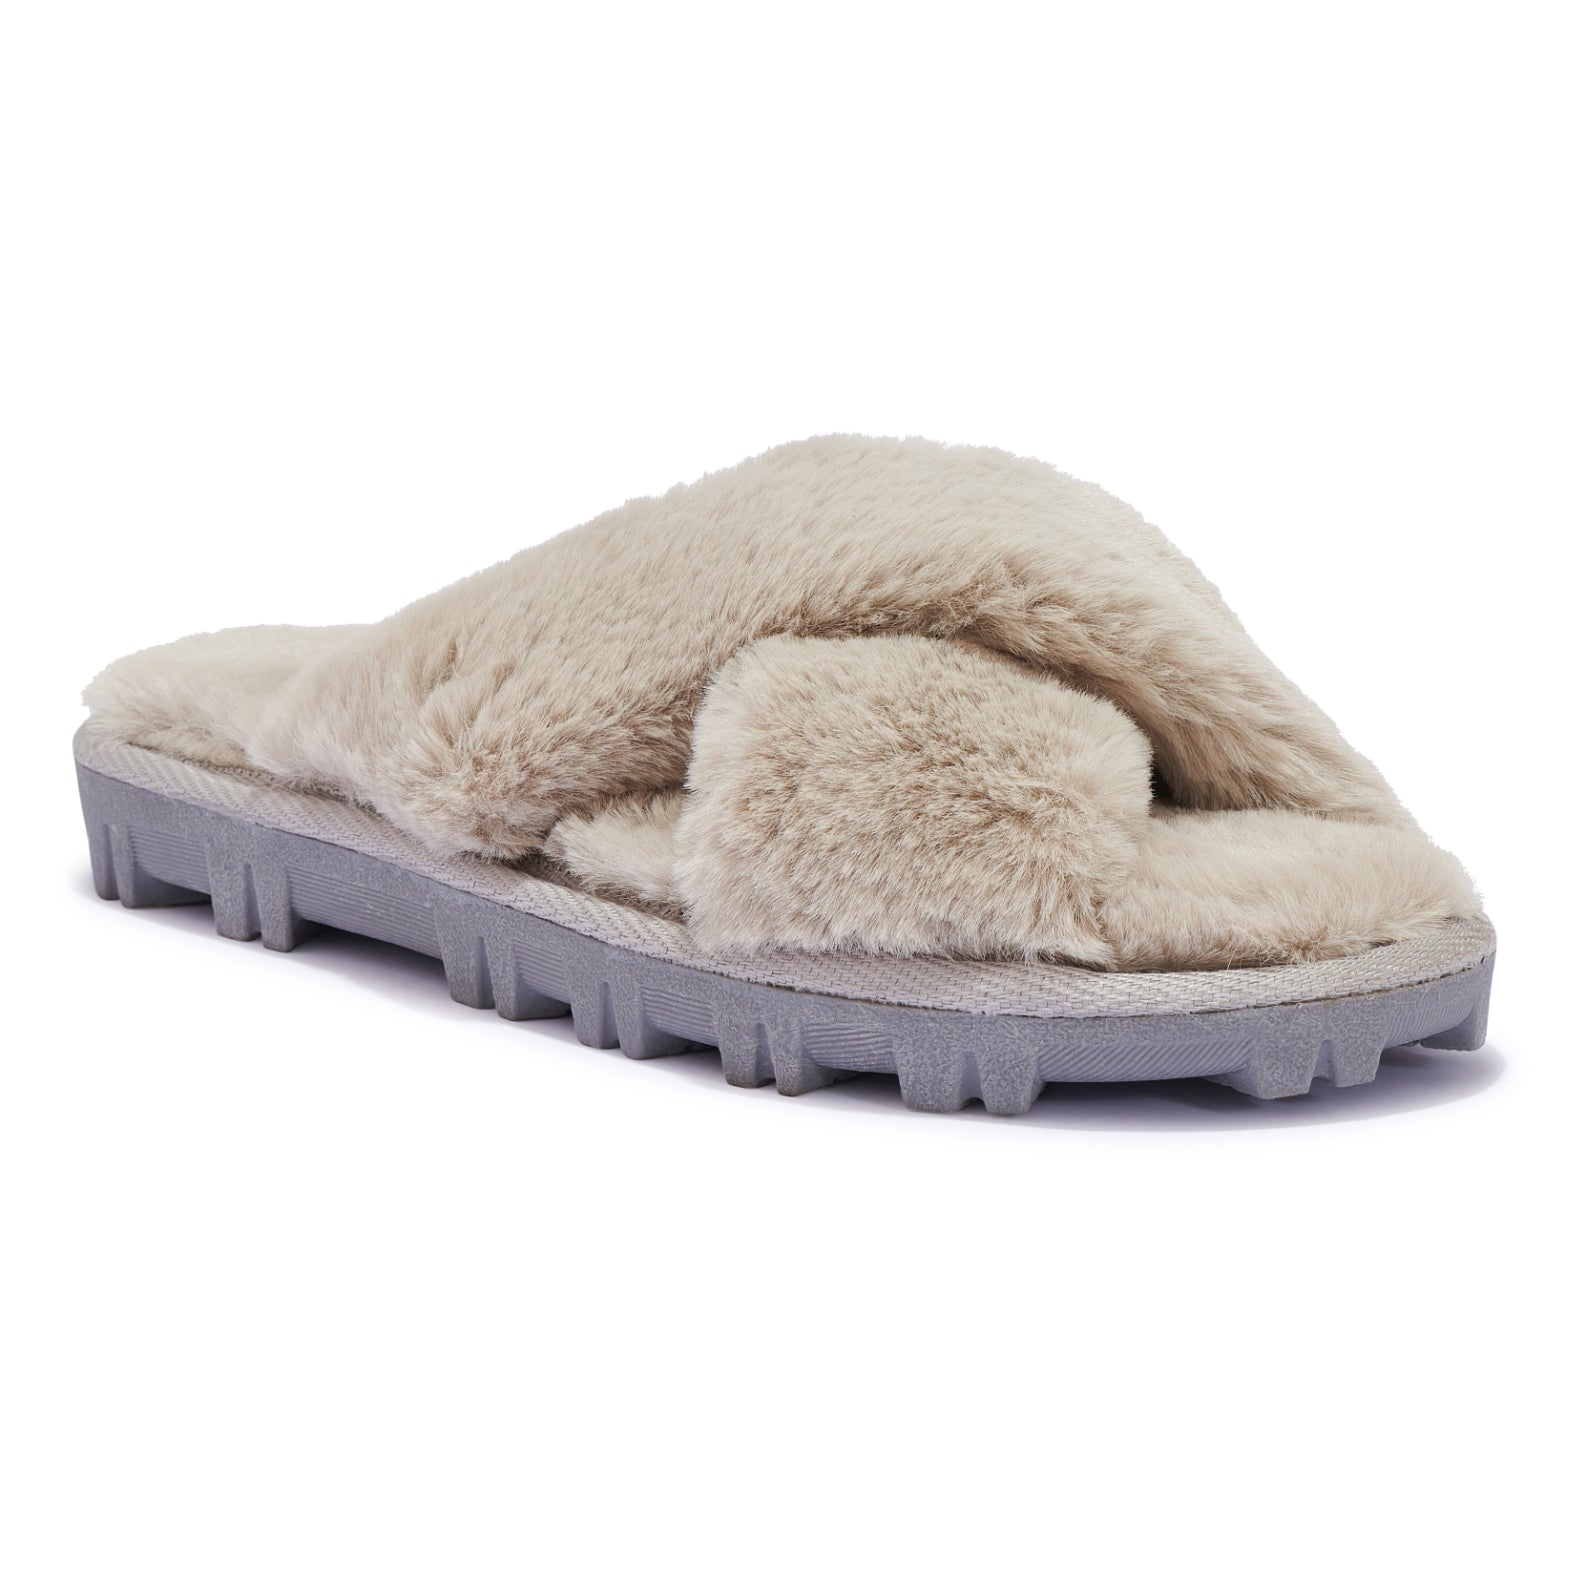 CARMELO5 - CROSSOVER DOUBLE STRAP FAUX FUR SLIPPERS